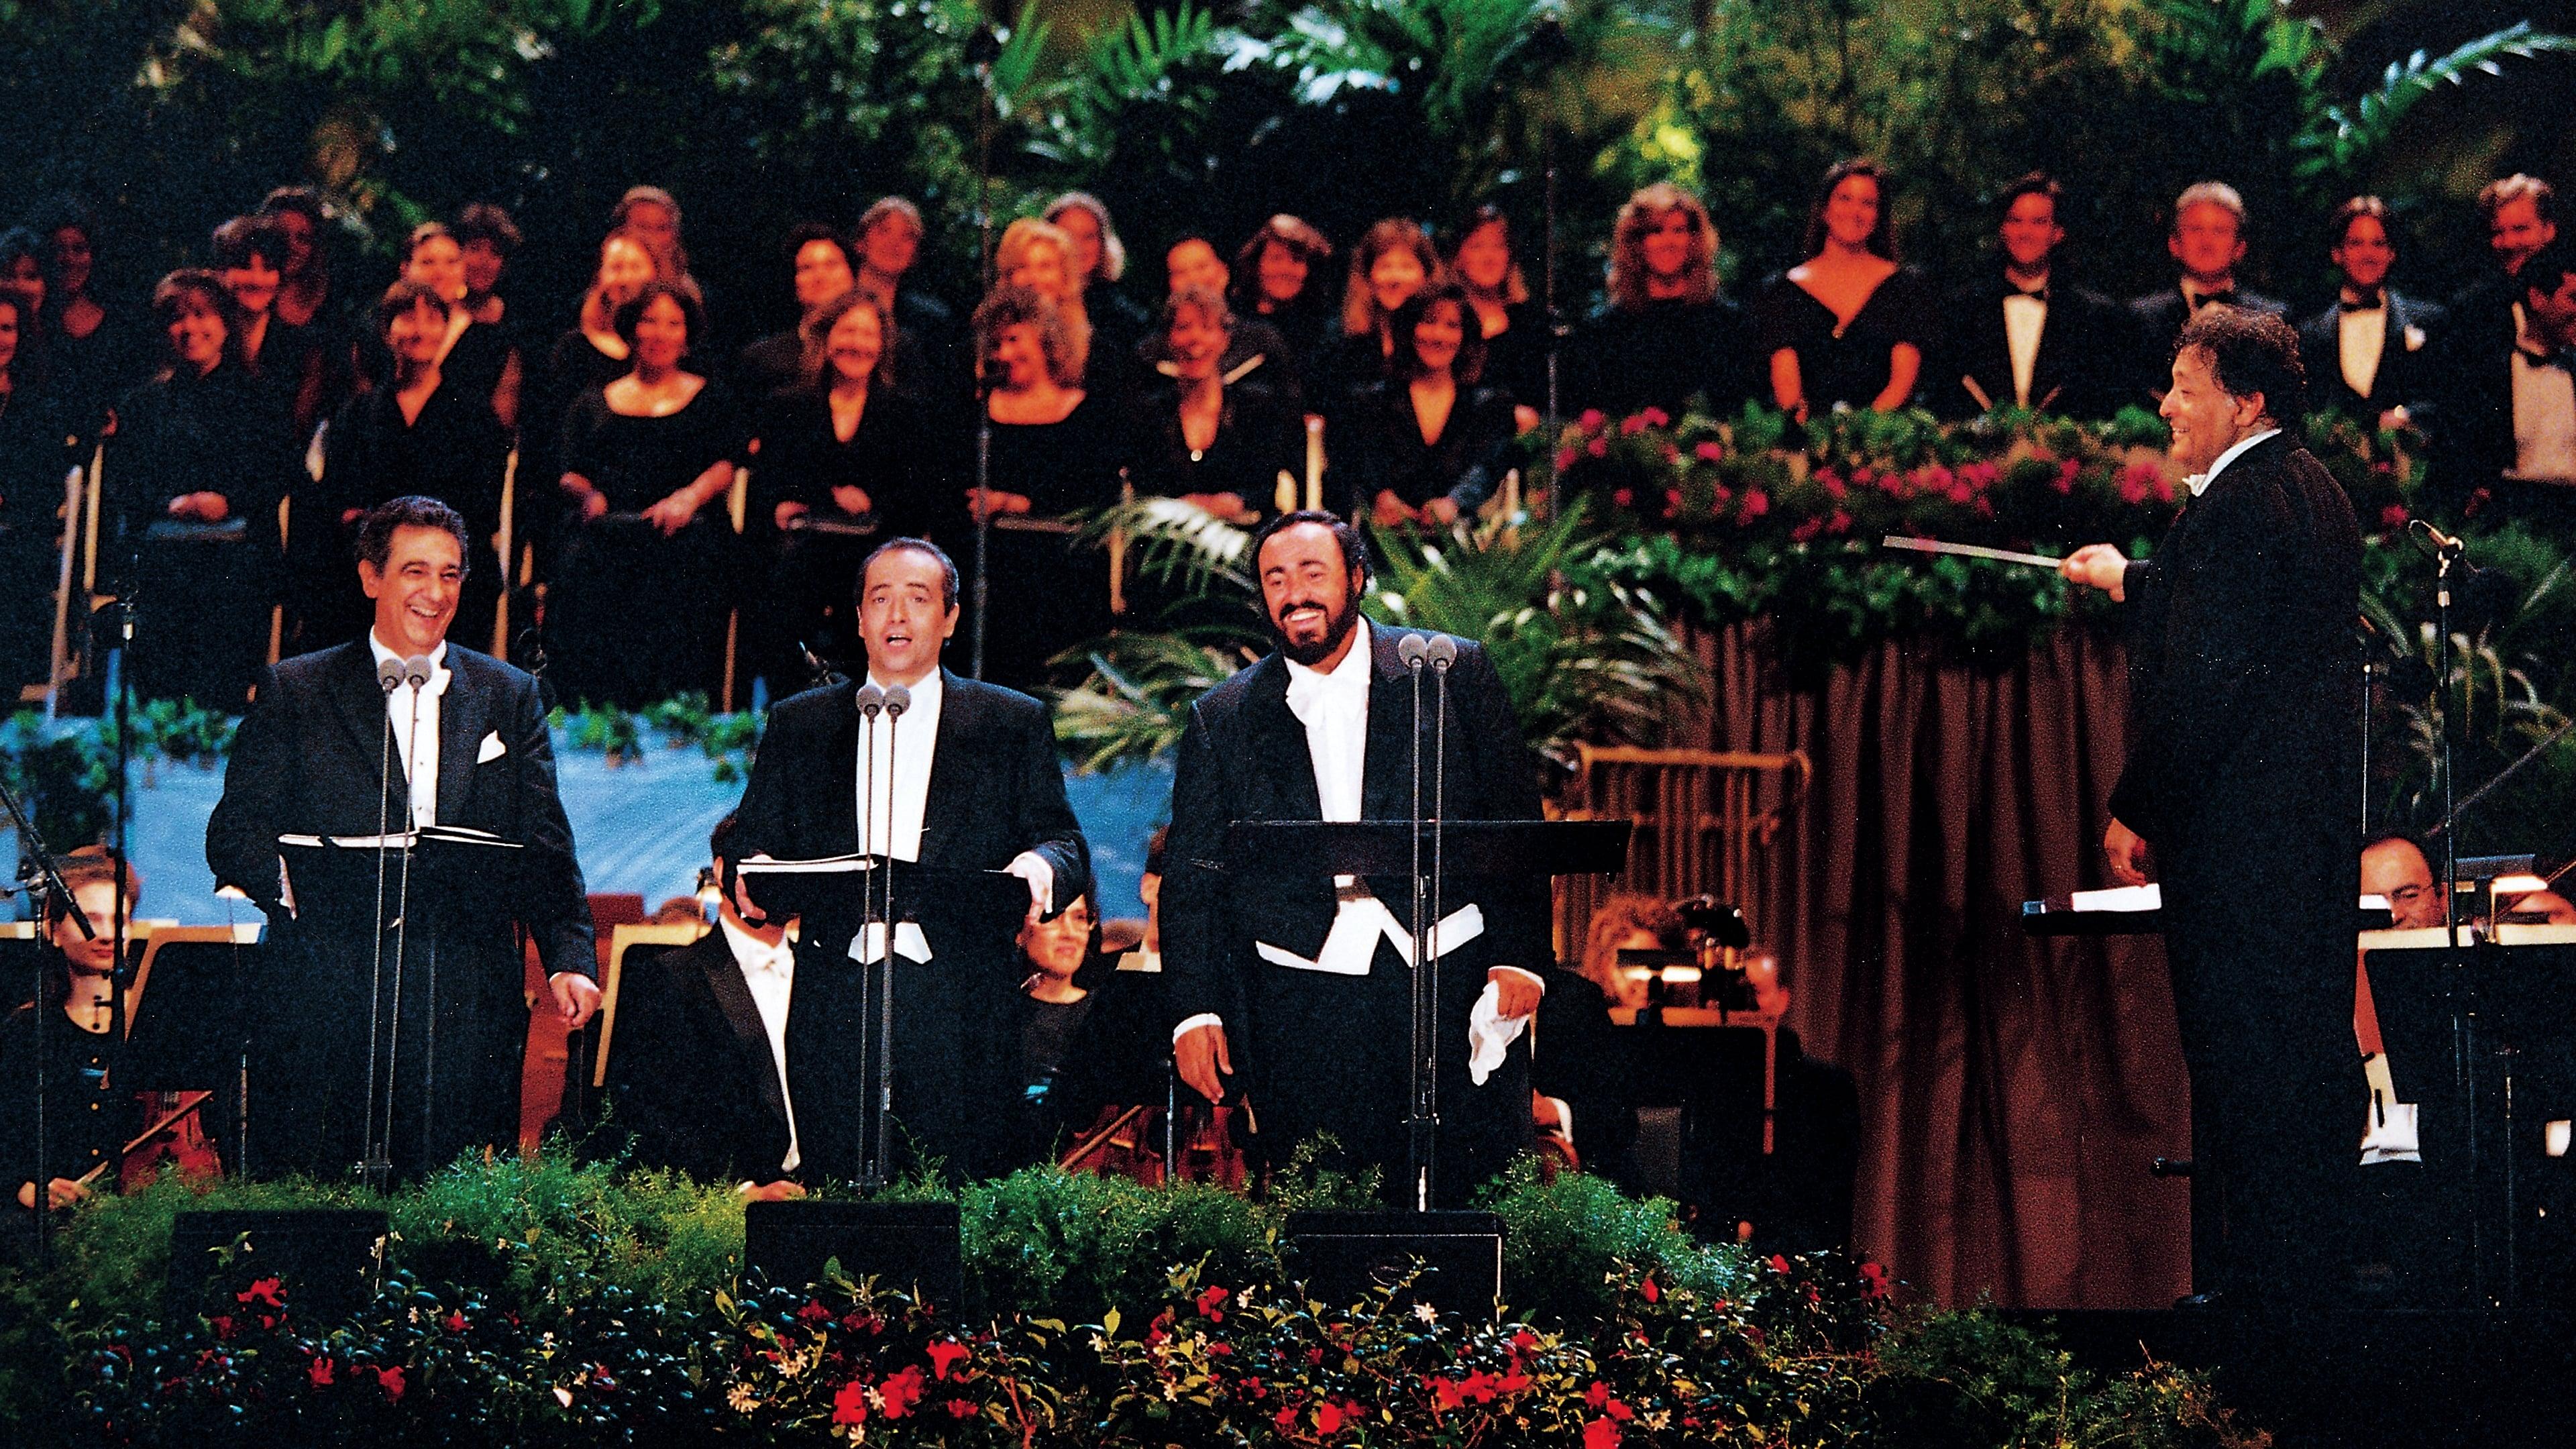 The 3 Tenors in Concert 1994 backdrop